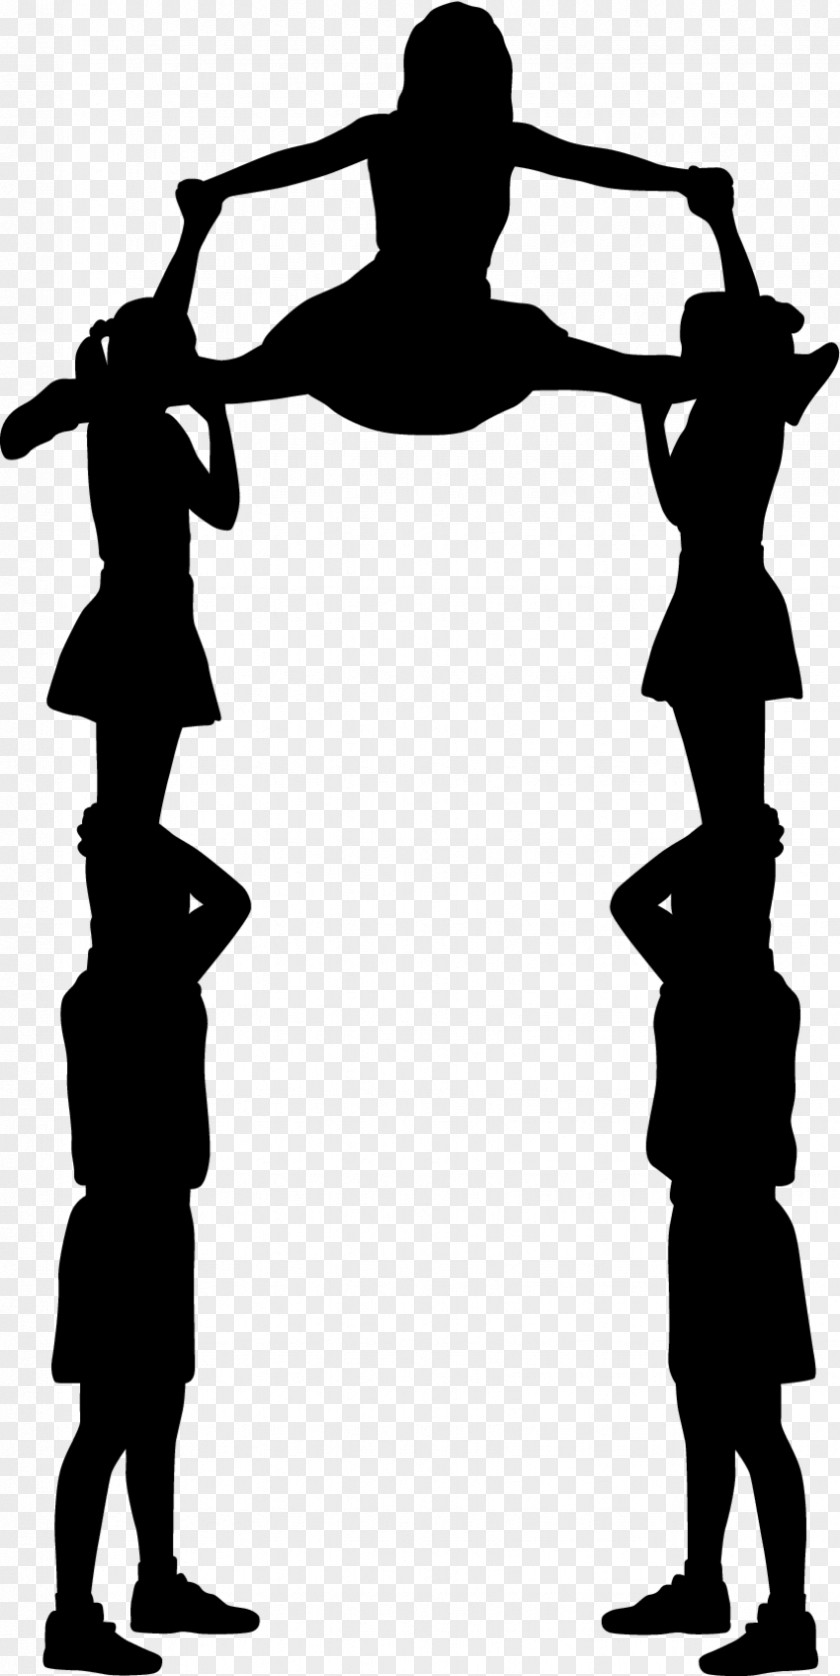 Cheerleading Music Sound Effect MP3 Silhouette PNG Silhouette, cheer clipart PNG